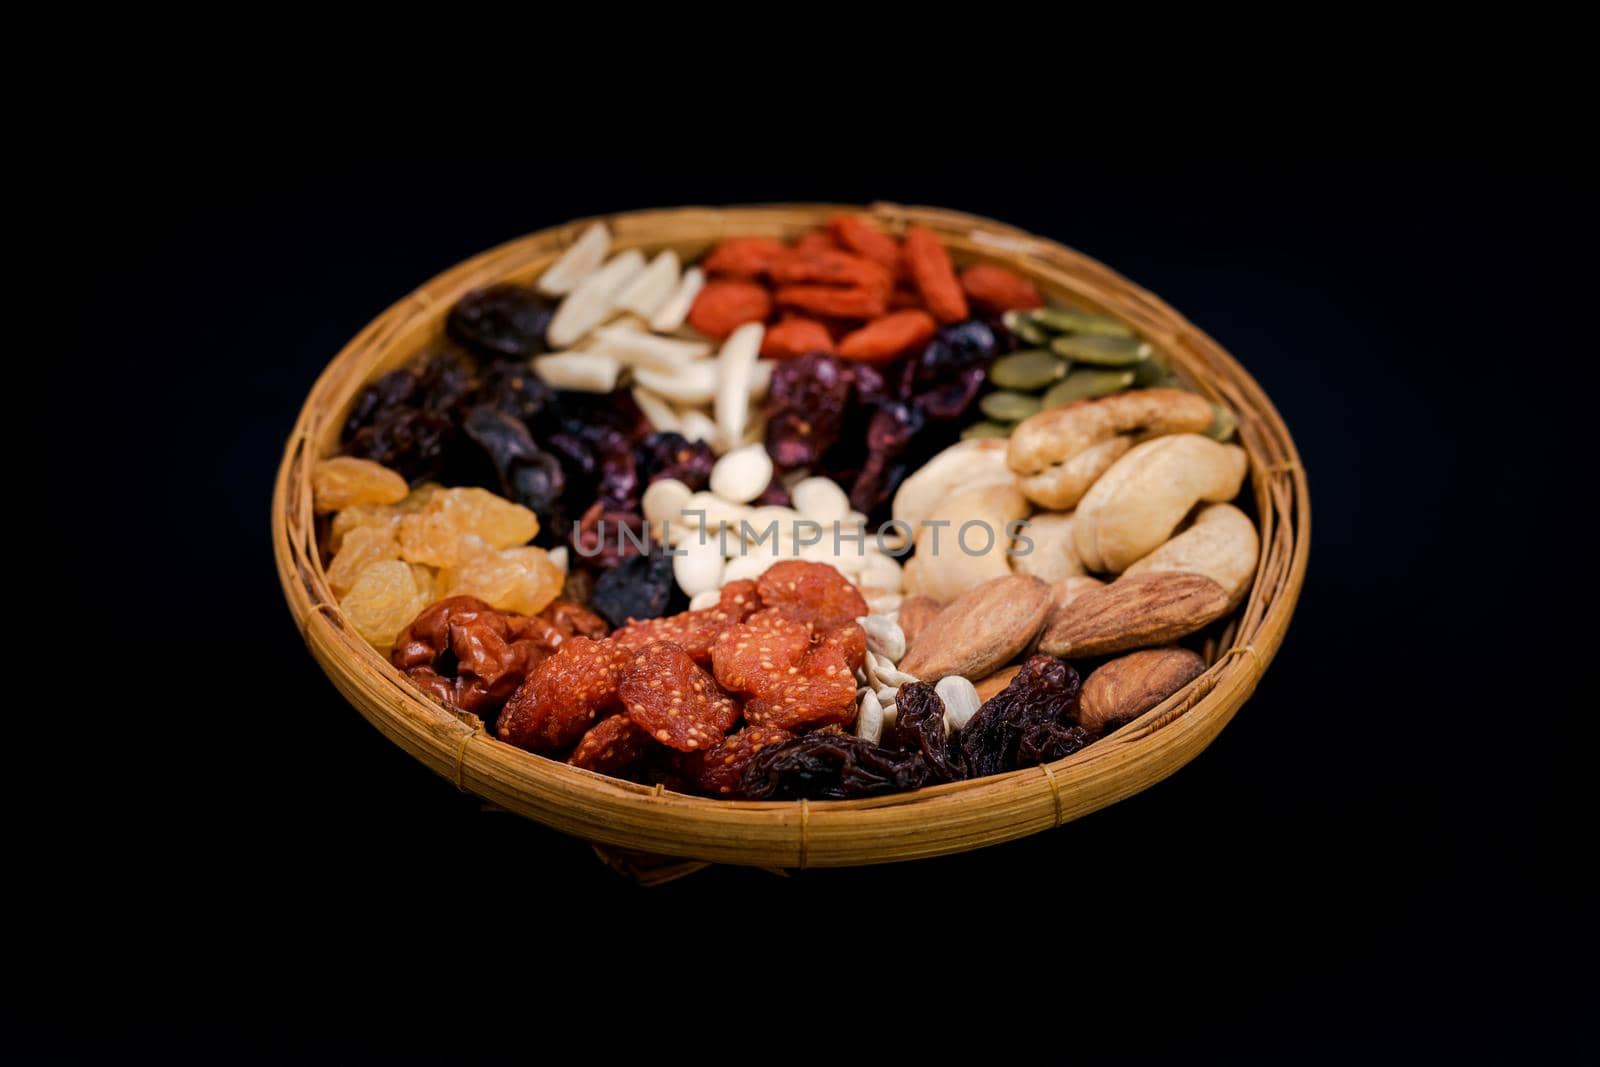 Group of various types of dried fruits and dried on a bamboo tray on black background.